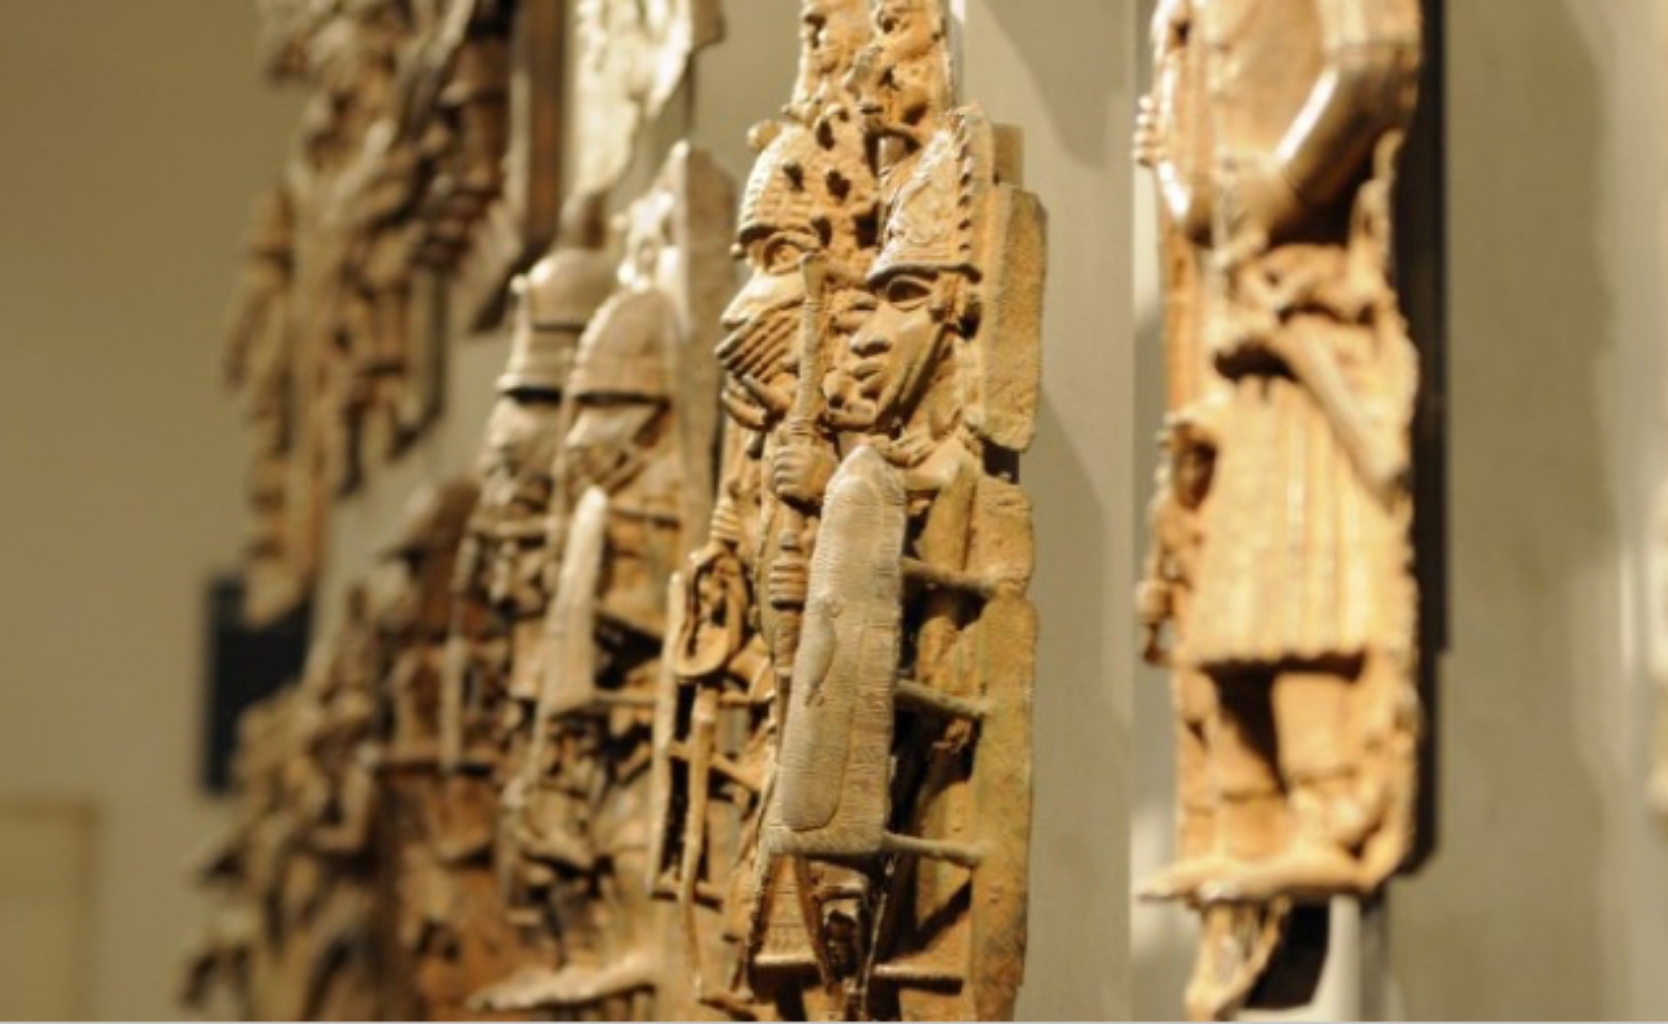 LONDON MUSEUM COMMENCE REPATRIATION OF BENIN CITY PLUNDERED ANTIQUITIES